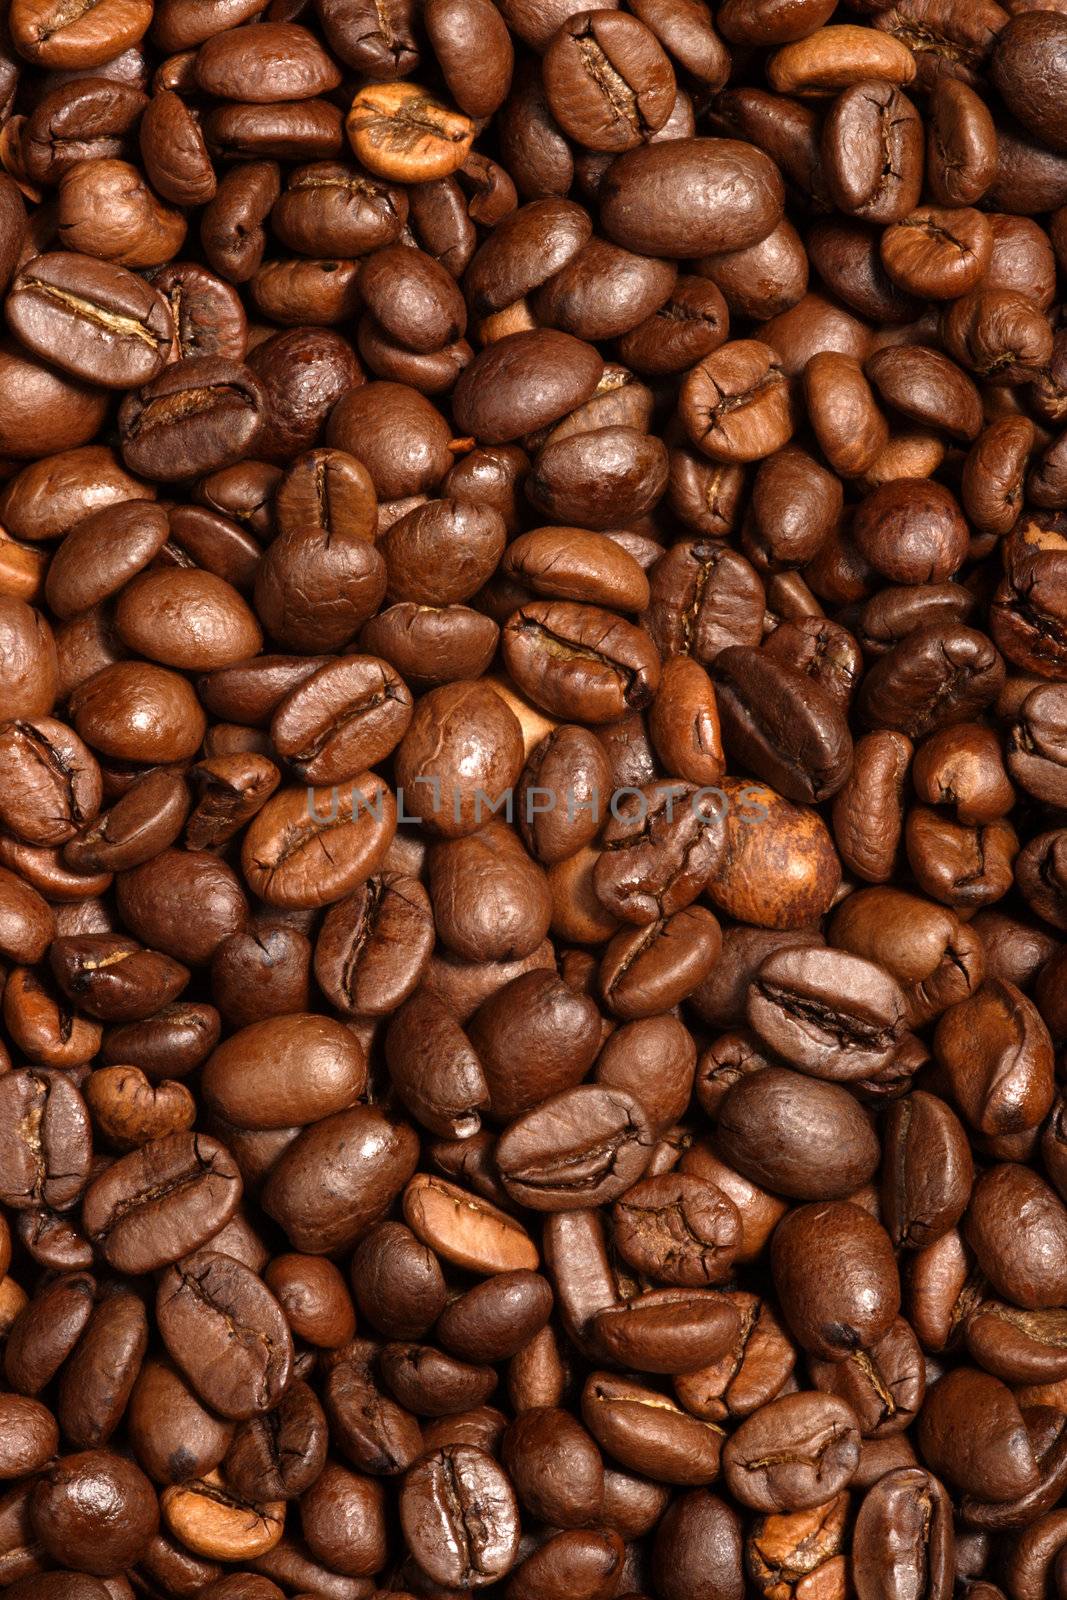 (XXL) Background image of roasted coffee beans.
